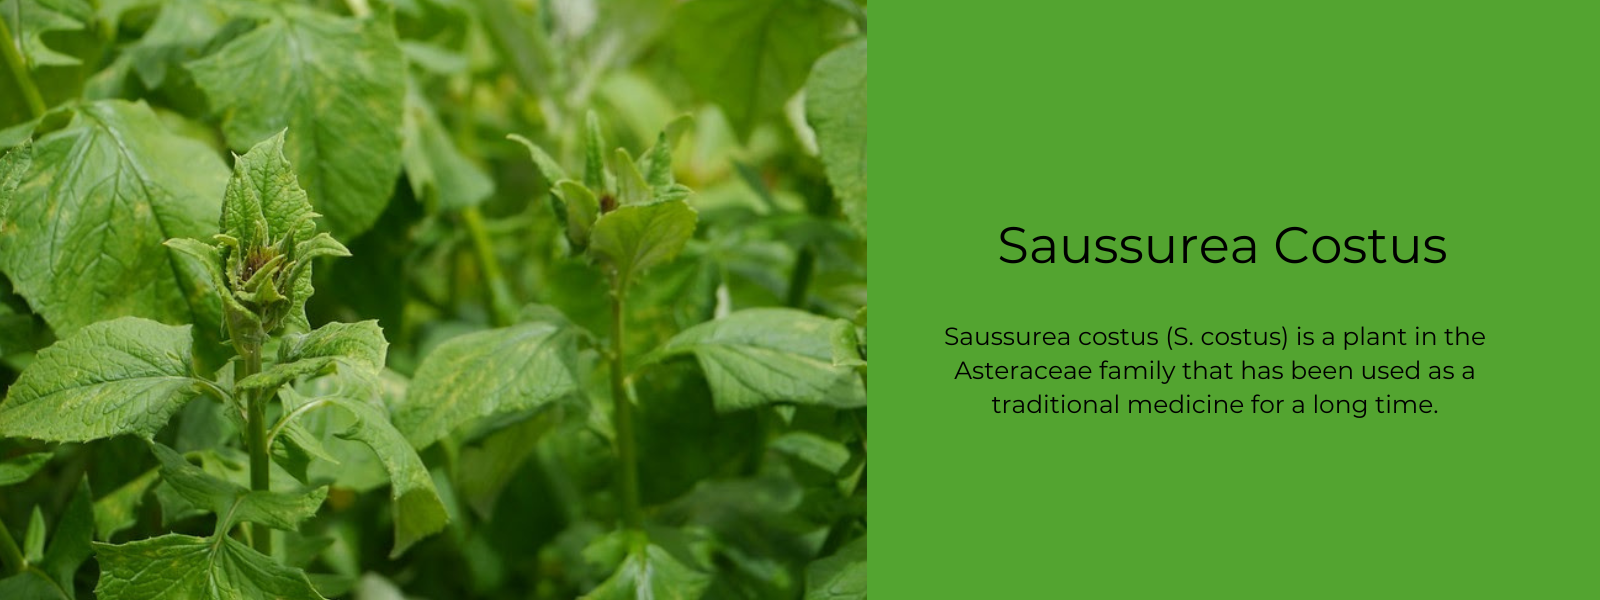 Saussurea Costus - Health Benefits, Uses and Important Facts